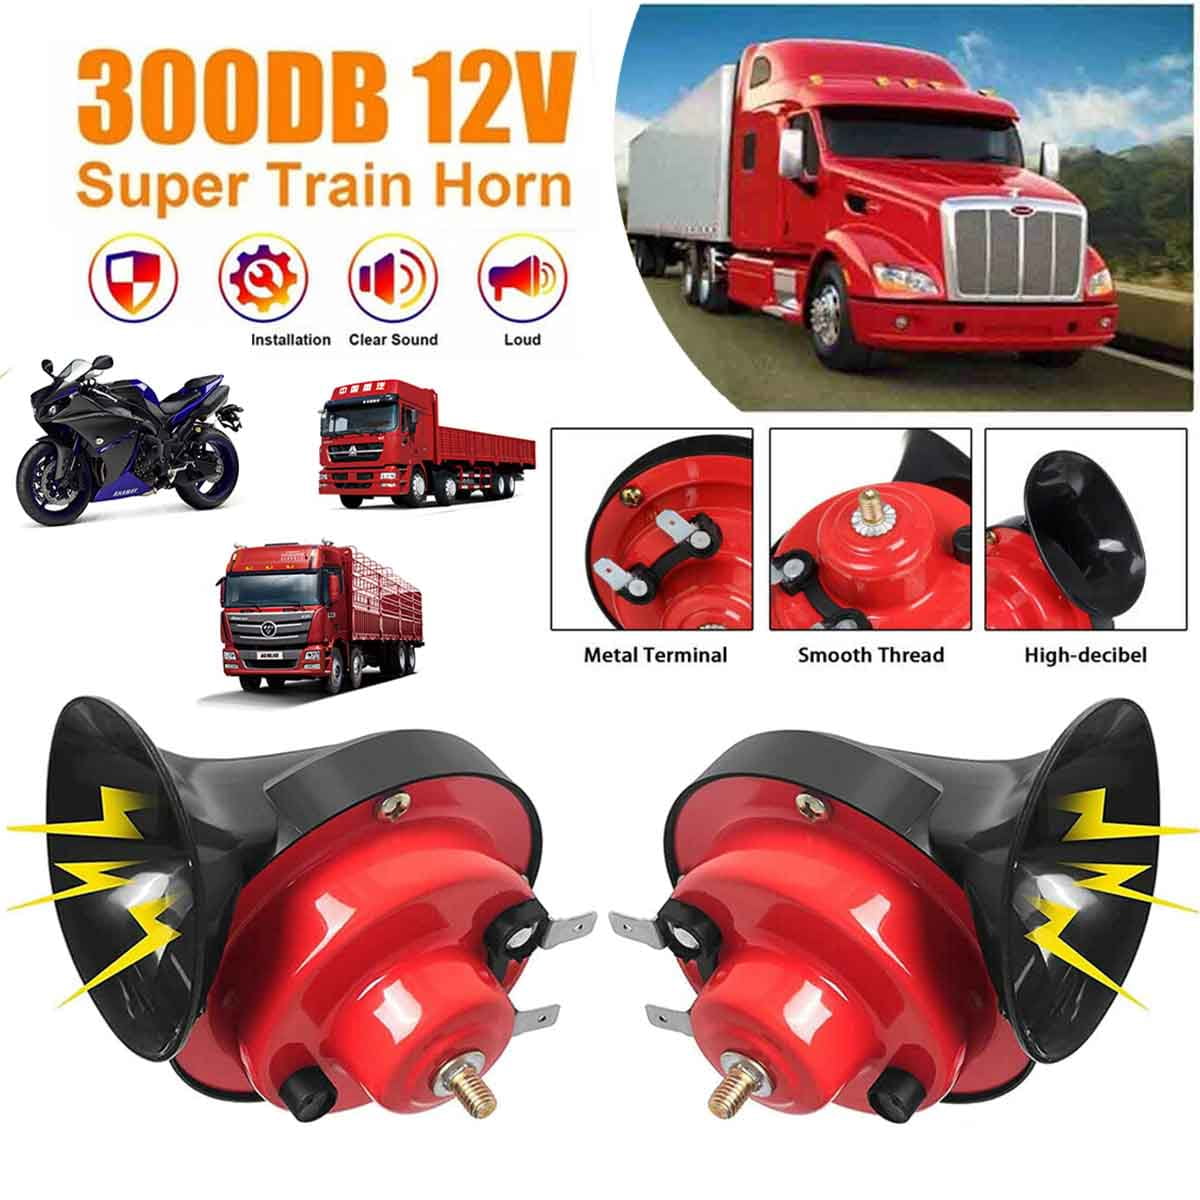 300DB Loud Train Horn for Truck Electric Snail Horns 12V High and